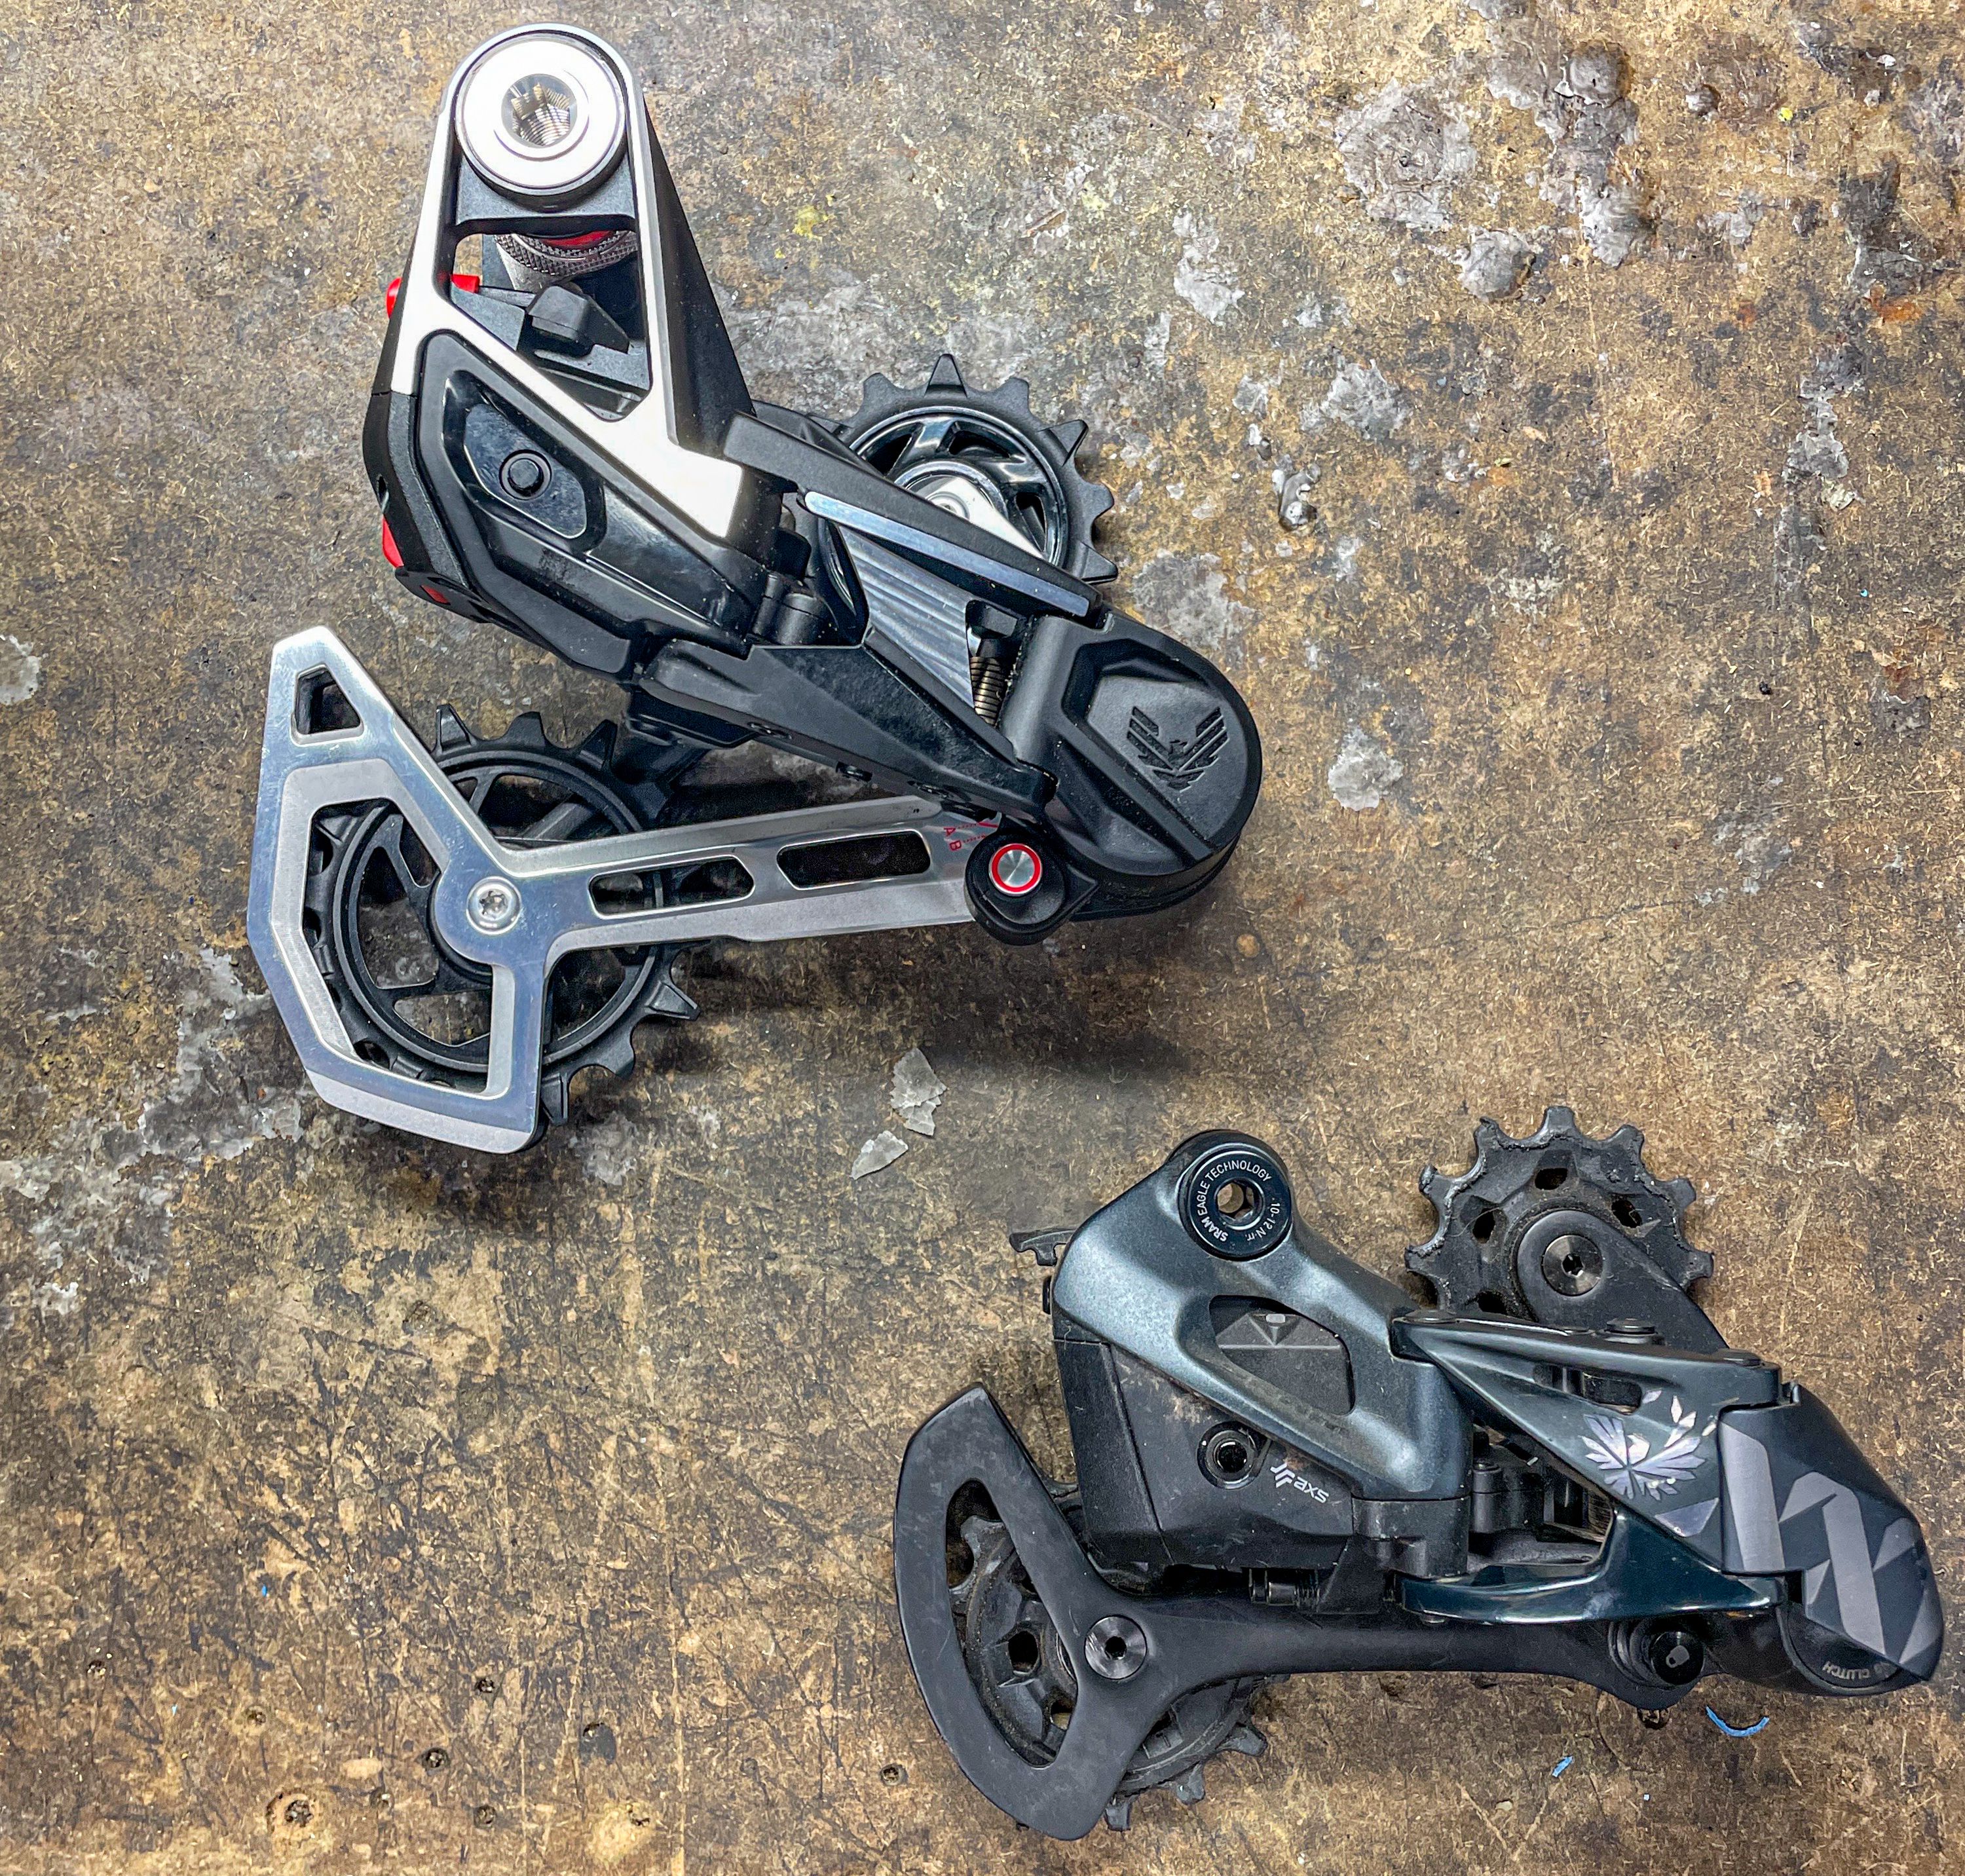 The T-Type derailleur (top) is noticeably larger and heavier than an Eagle AXS derailleur (bottom) 